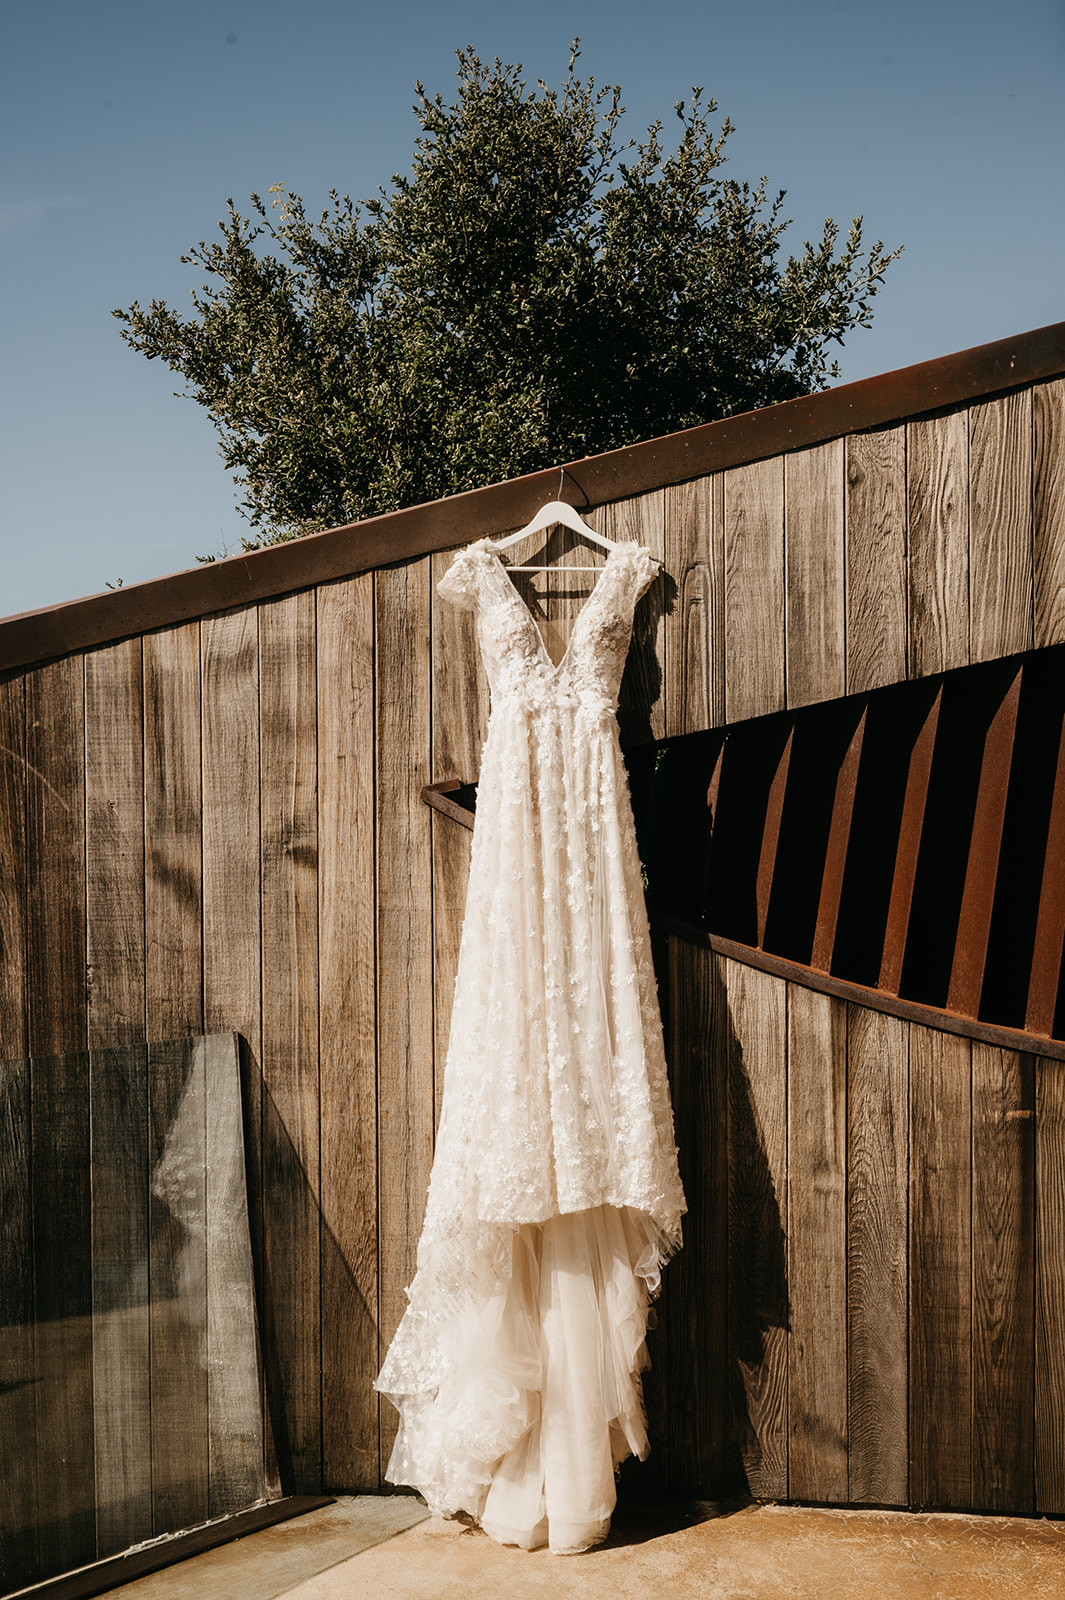 Bridal Dress hanging on wooden wall Post Ranch